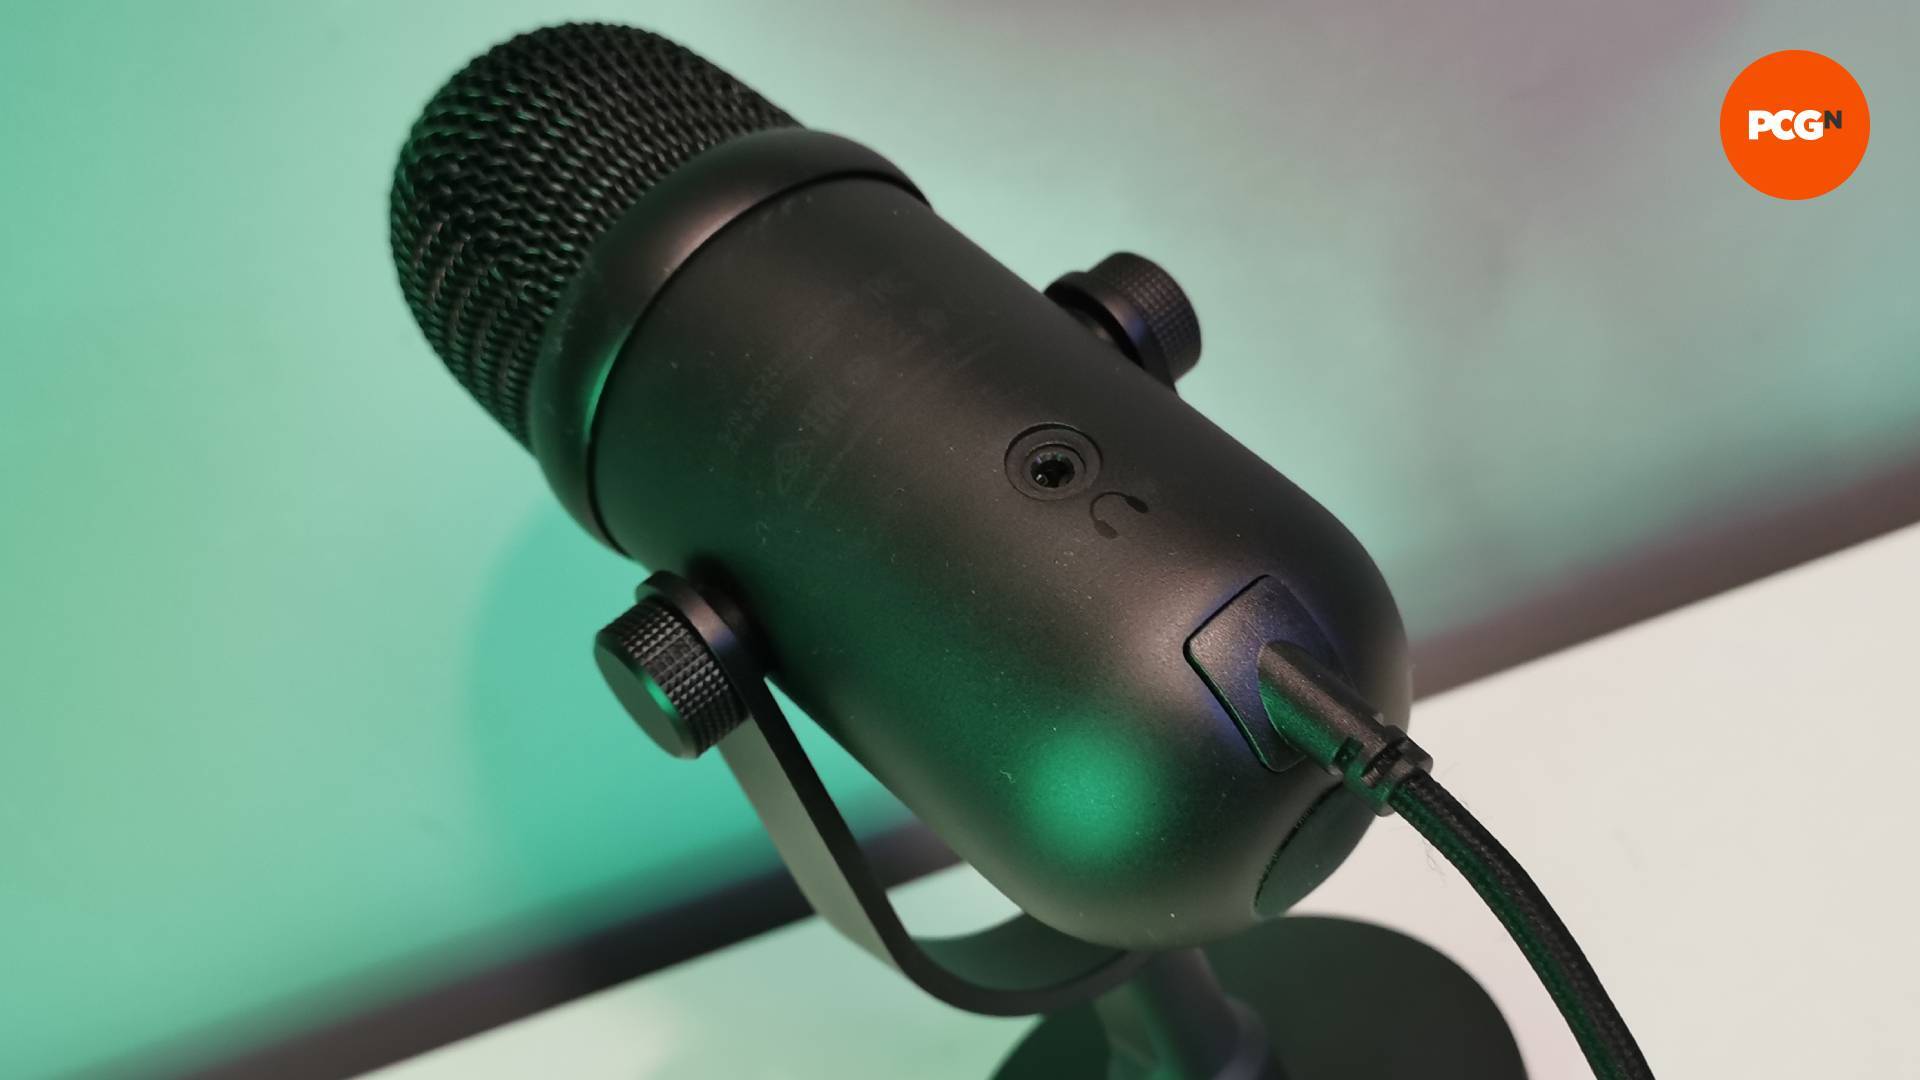 A close-up of the The Razer Seiren V2 Pro microphone ports